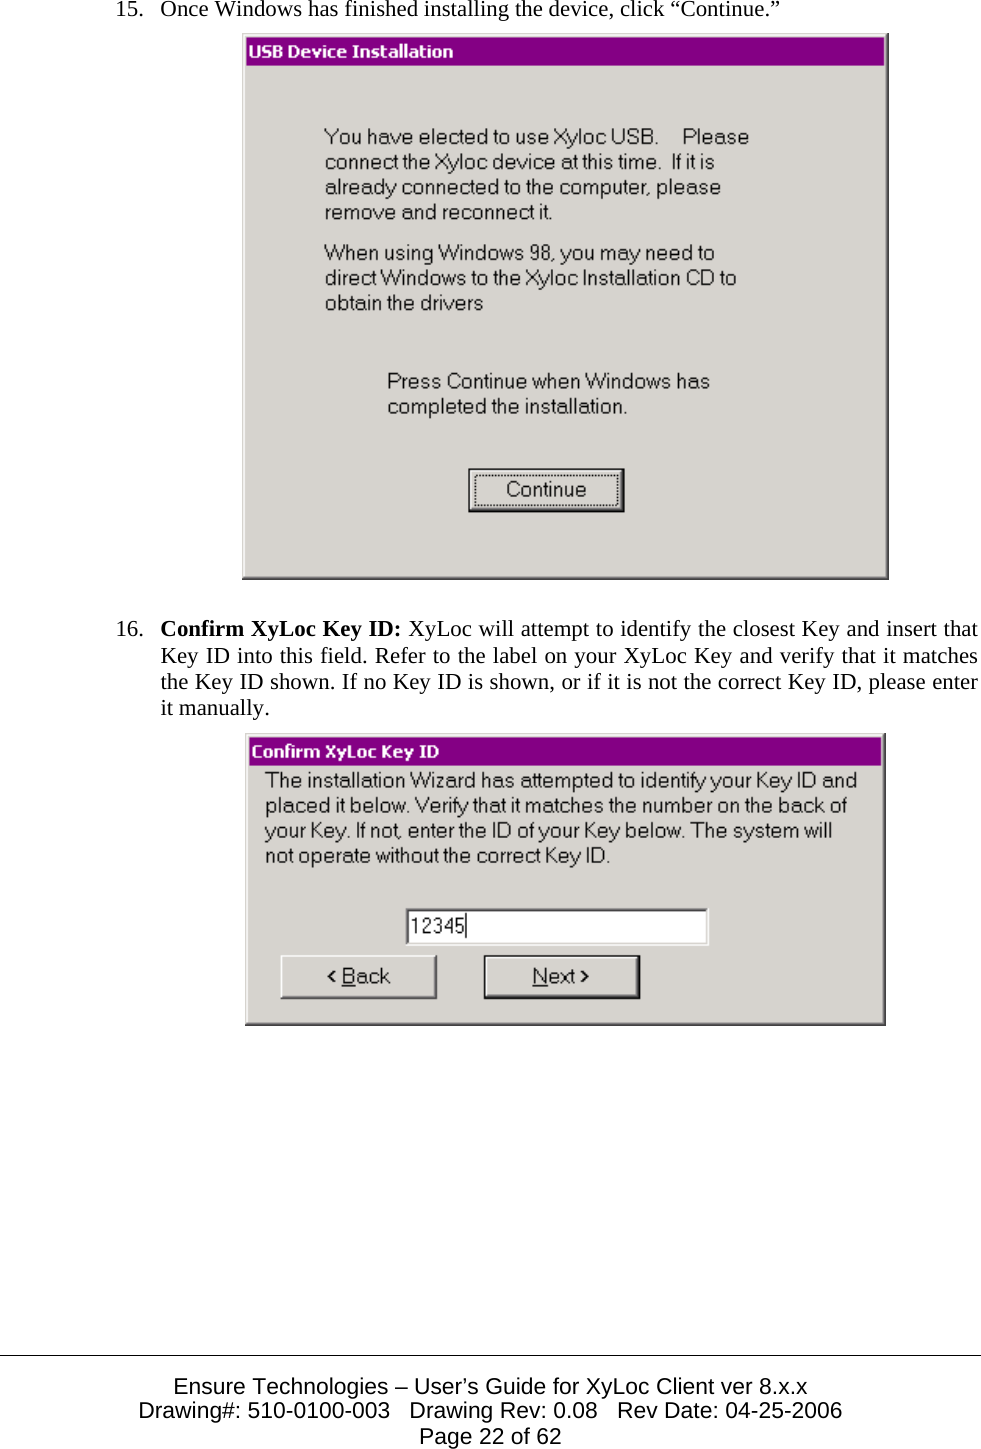  Ensure Technologies – User’s Guide for XyLoc Client ver 8.x.x Drawing#: 510-0100-003   Drawing Rev: 0.08   Rev Date: 04-25-2006 Page 22 of 62 15. Once Windows has finished installing the device, click “Continue.”   16. Confirm XyLoc Key ID: XyLoc will attempt to identify the closest Key and insert that Key ID into this field. Refer to the label on your XyLoc Key and verify that it matches the Key ID shown. If no Key ID is shown, or if it is not the correct Key ID, please enter it manually.   